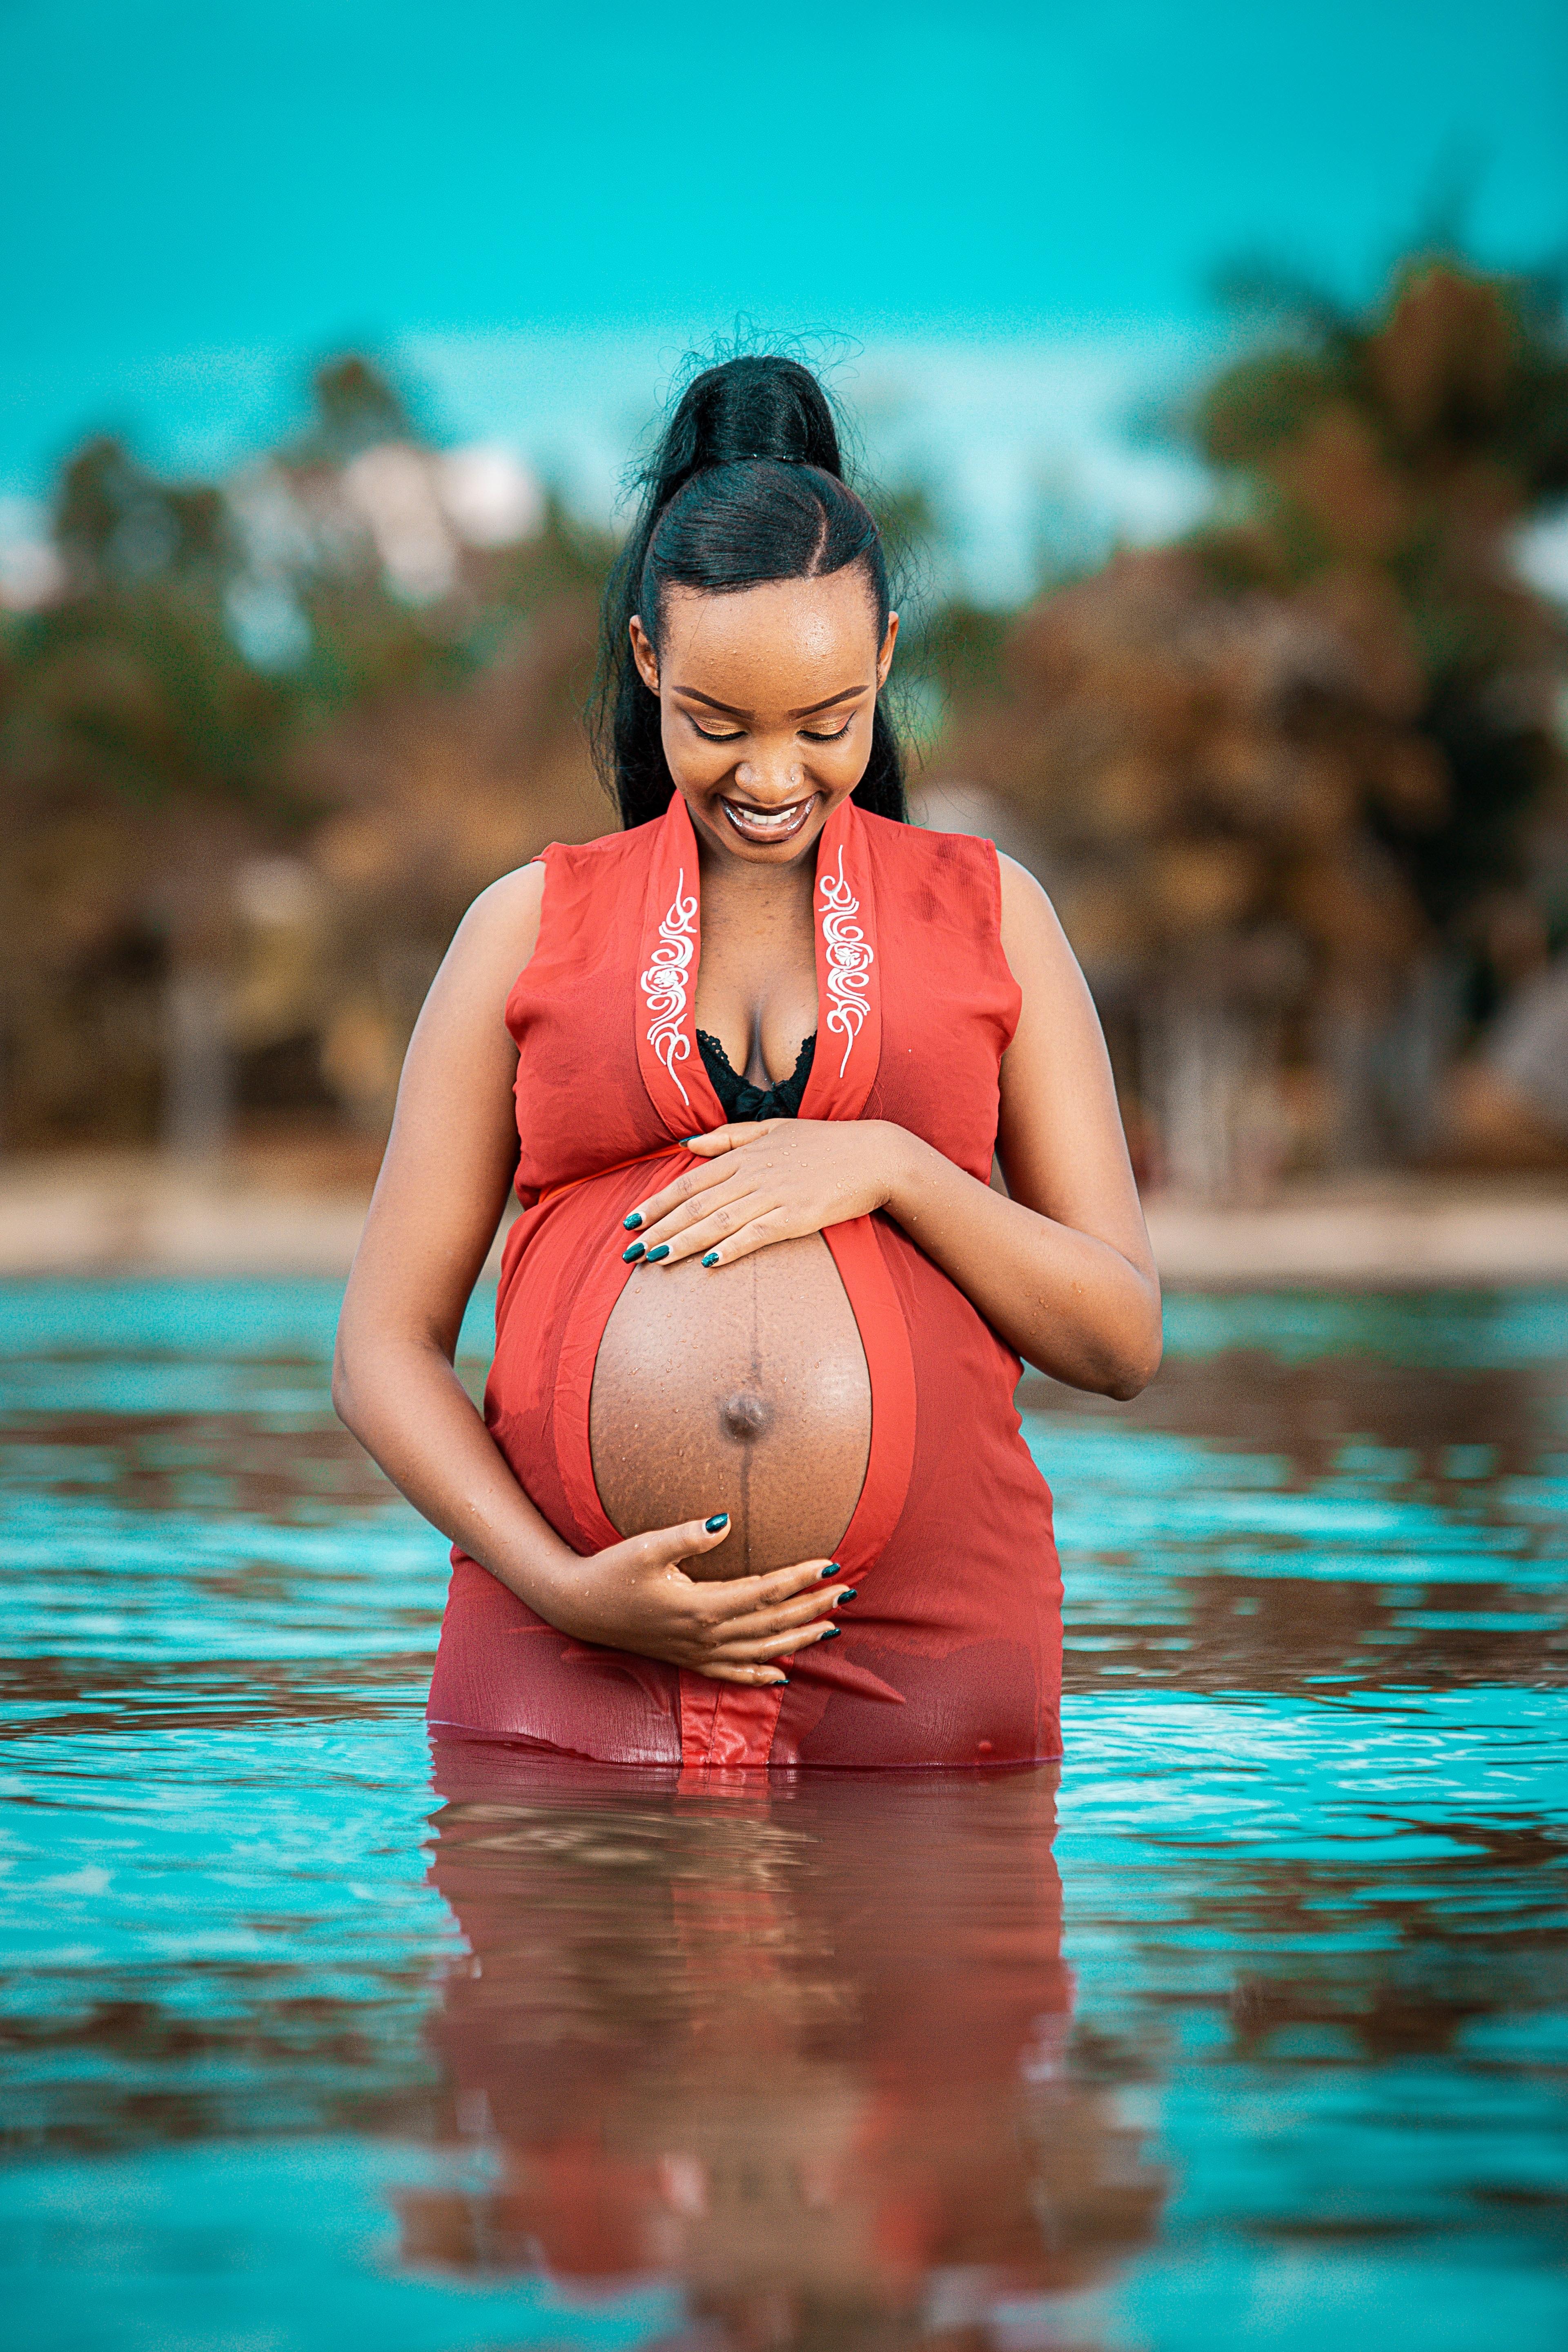 Can you swim in a pool at 38 weeks pregnant? 